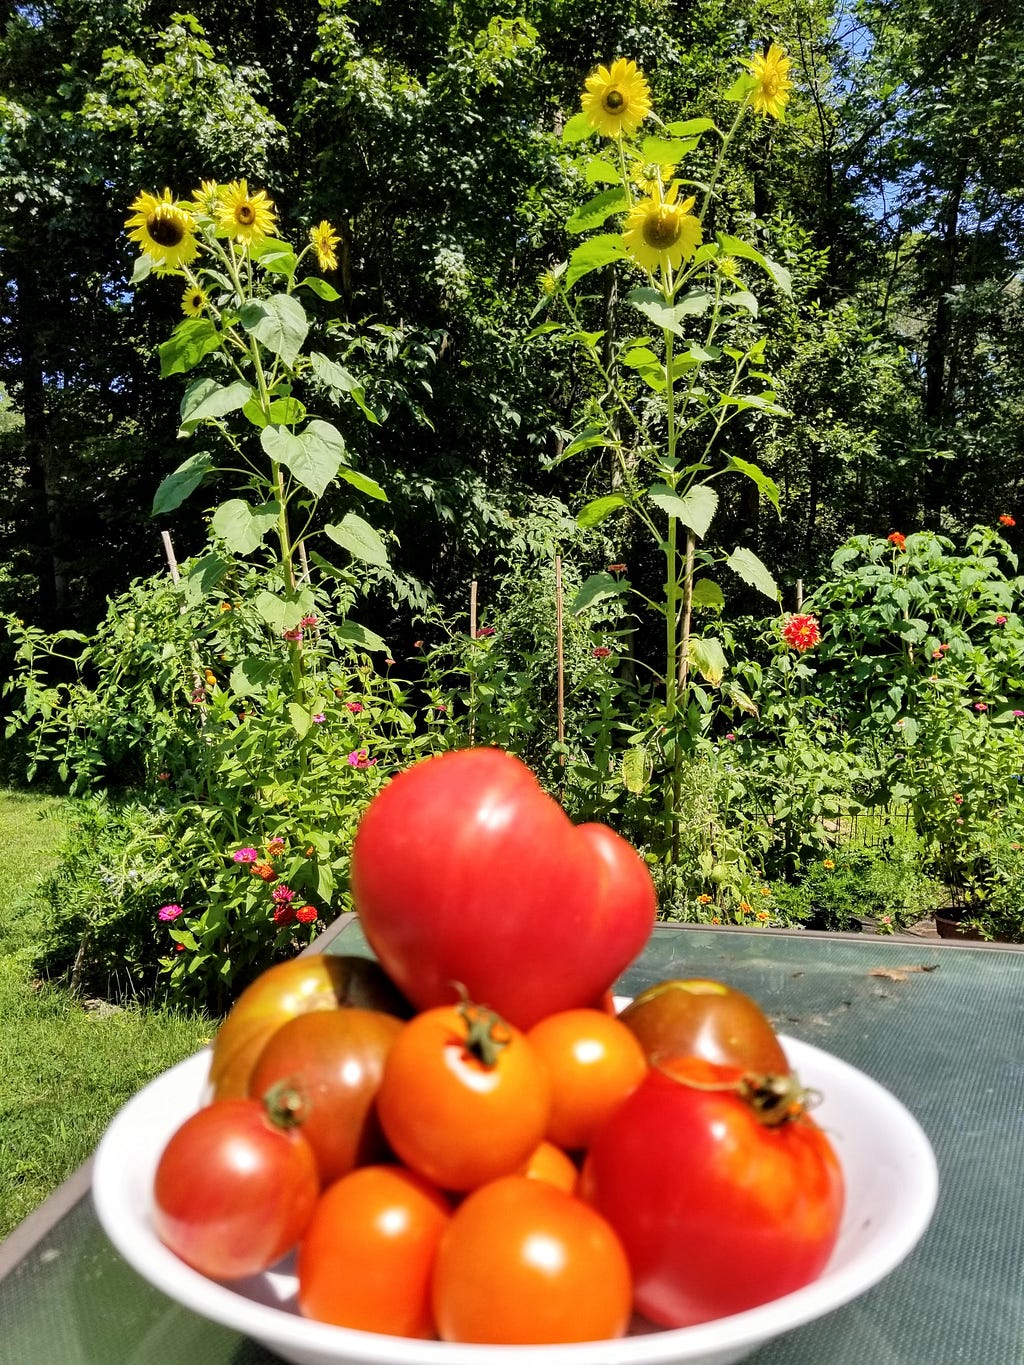 A bowl of tomatoes in front of our garden with sunflowers